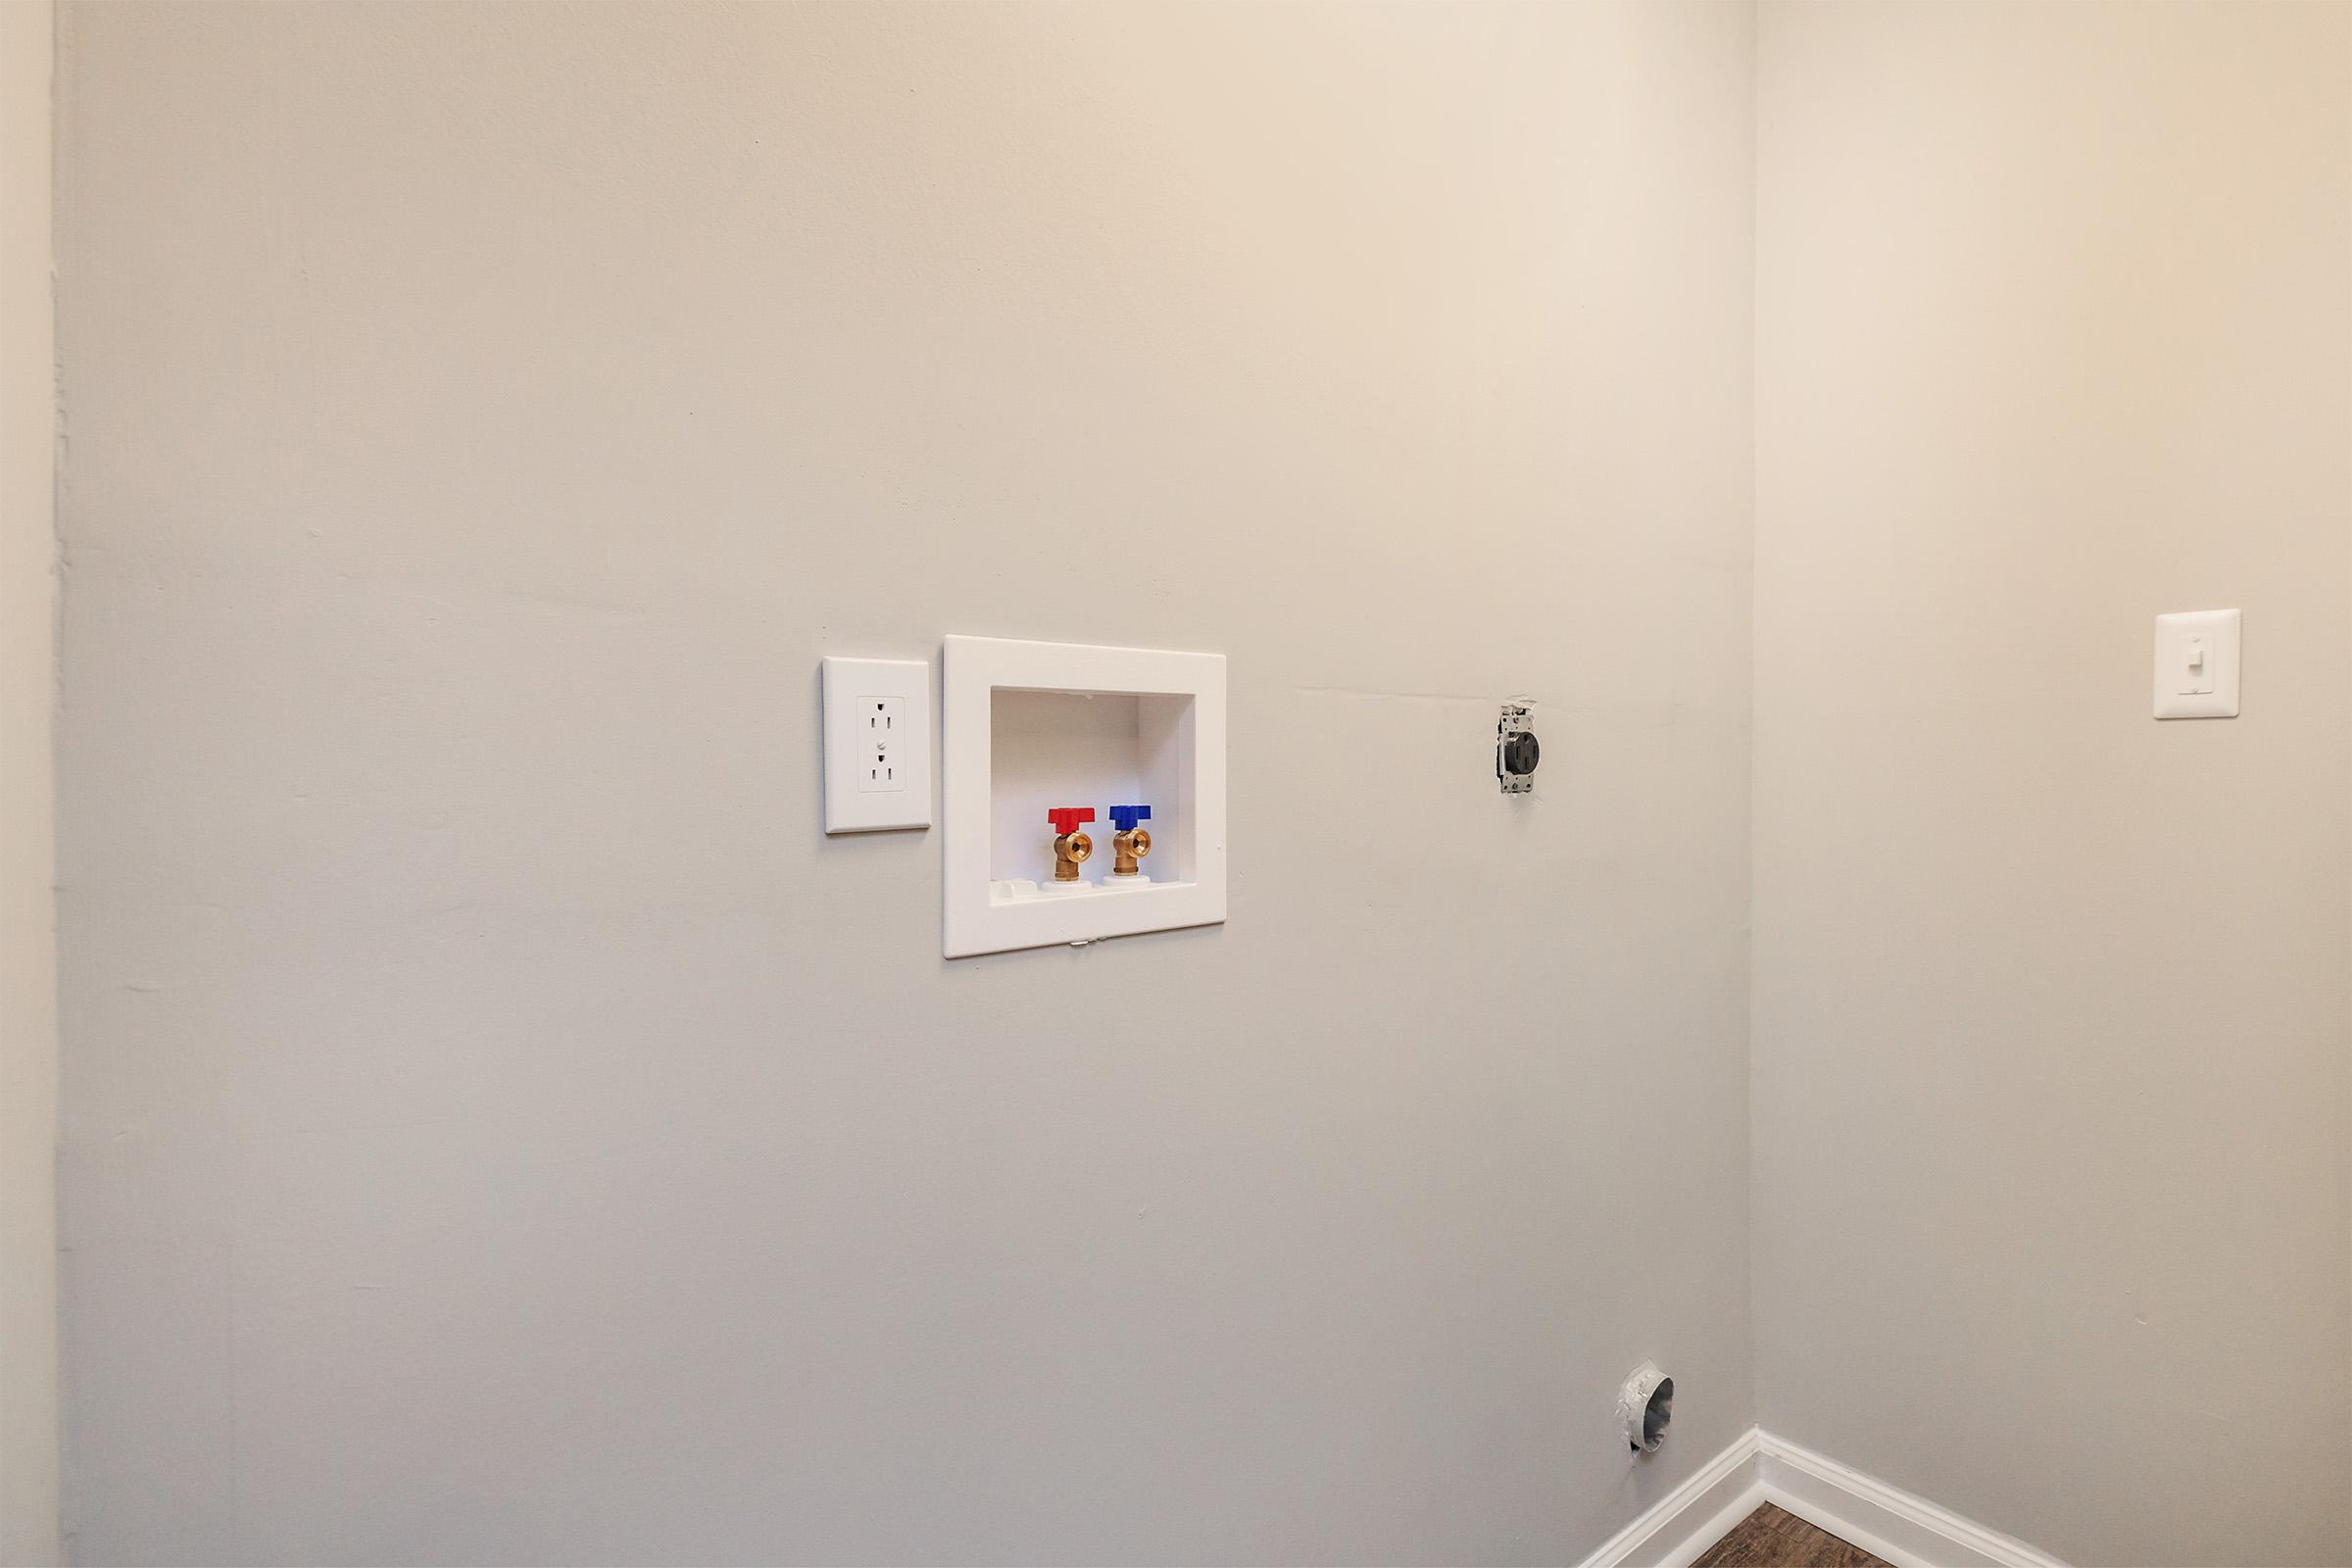 WE HAVE WASHER AND DRYER CONNECTIONS AT KINGSTON POINTE APARTMENTS